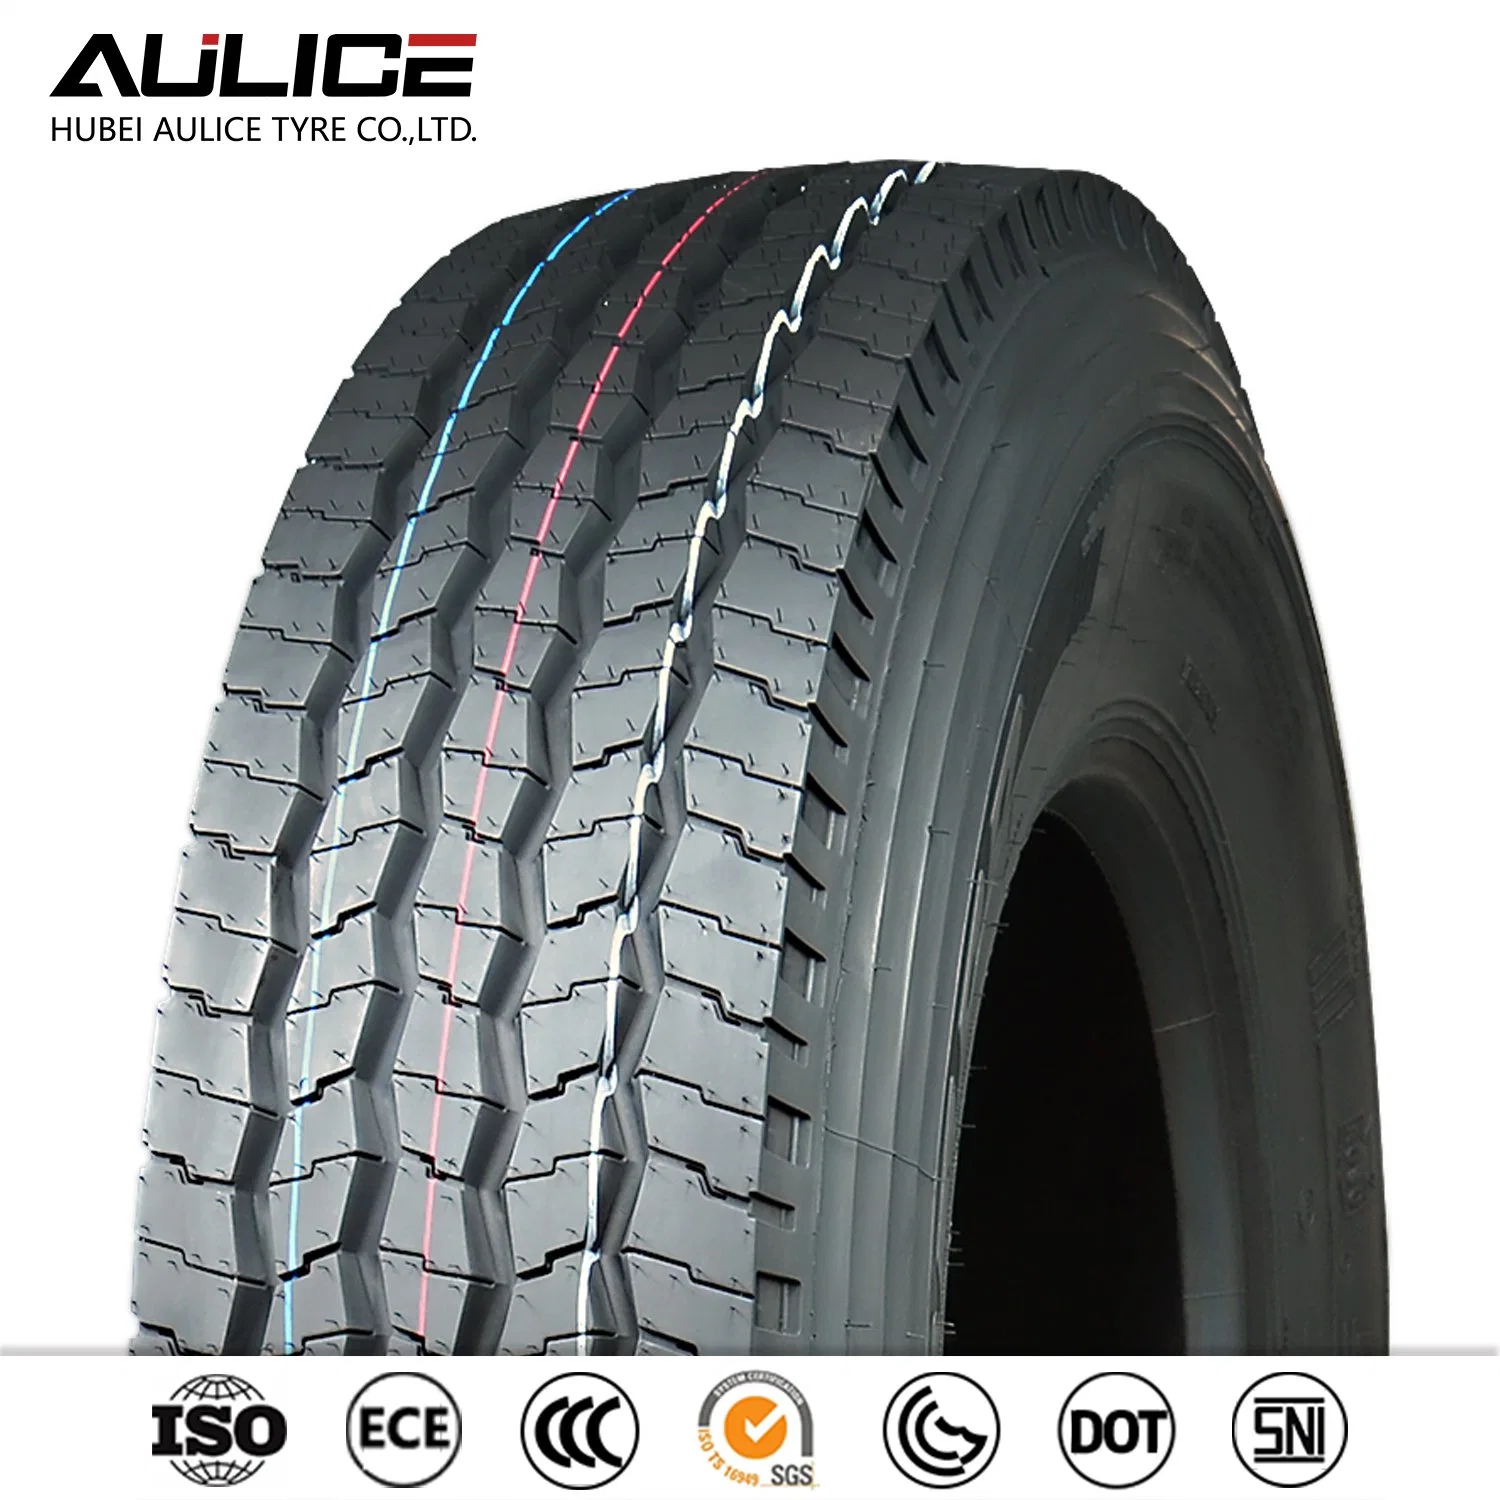 12R22.5 Aulice Low pressure heavy duty truck all steel radial TBR radial bus and truck tyres tires with puncture resistance(AR900)